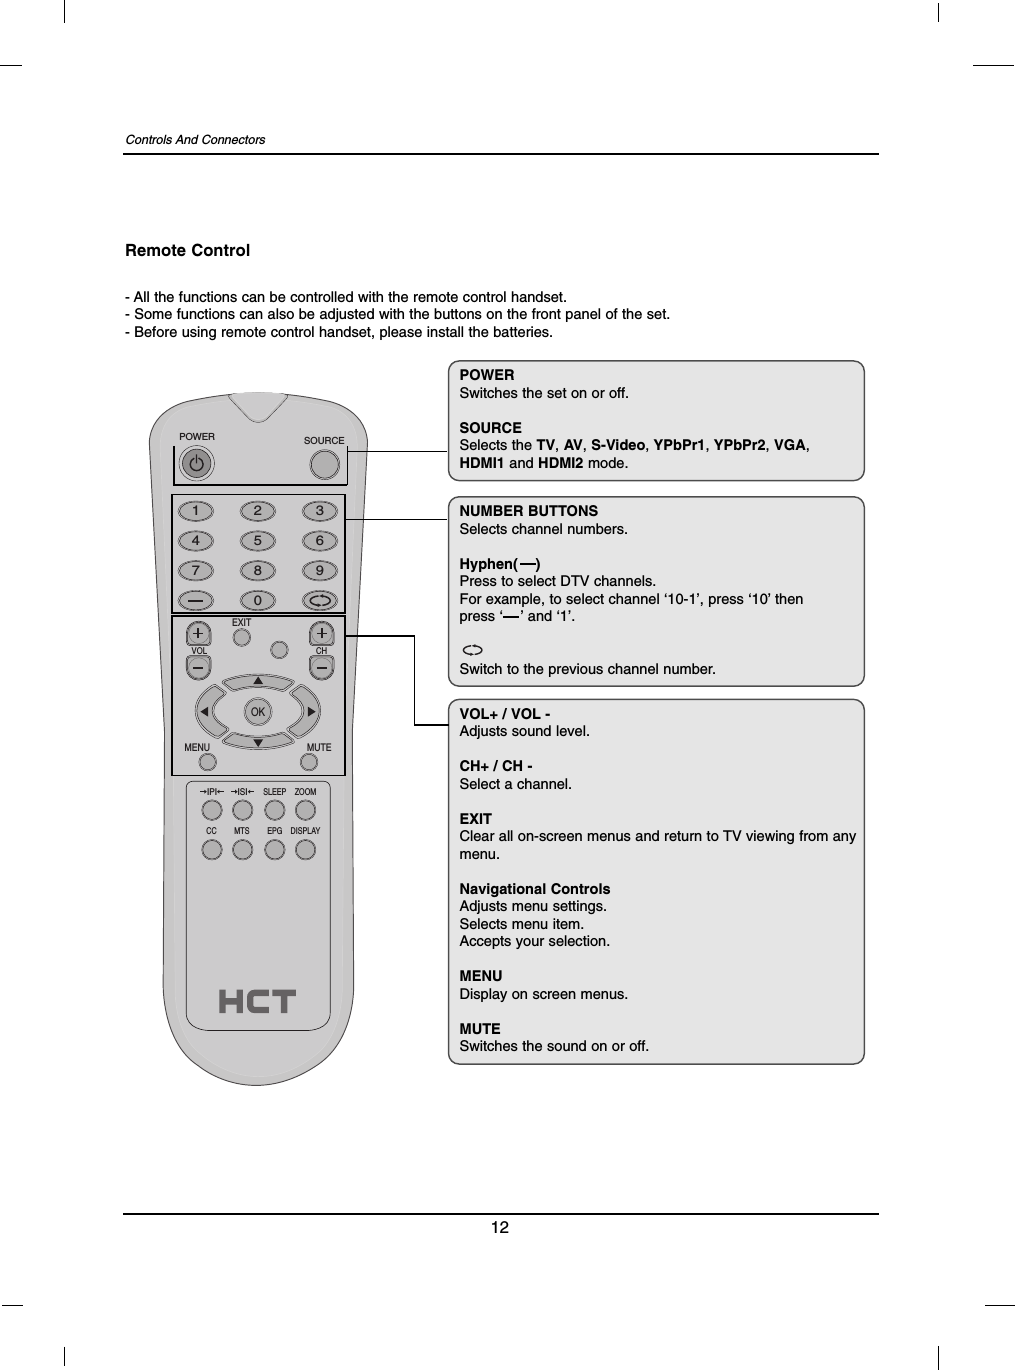 Controls And Connectors12- All the functions can be controlled with the remote control handset.- Some functions can also be adjusted with the buttons on the front panel of the set.- Before using remote control handset, please install the batteries.Remote Control1 2 34 5 67 8 90EXITVOL CHMENU MUTEOKSOURCEPOWERSLEEP ZOOMIPI ISIEPGMTSCC DISPLAYNUMBER BUTTONSSelects channel numbers.Hyphen(    )Press to select DTV channels.For example, to select channel ‘10-1’, press ‘10’ then press ‘    ’ and ‘1’.Switch to the previous channel number.VOL+ / VOL -Adjusts sound level.CH+ / CH -Select a channel.EXITClear all on-screen menus and return to TV viewing from anymenu.Navigational ControlsAdjusts menu settings.Selects menu item.Accepts your selection.MENUDisplay on screen menus.MUTESwitches the sound on or off.POWERSwitches the set on or off.SOURCESelects the TV, AV,S-Video,YPbPr1,YPbPr2,VGA,HDMI1 and HDMI2 mode.